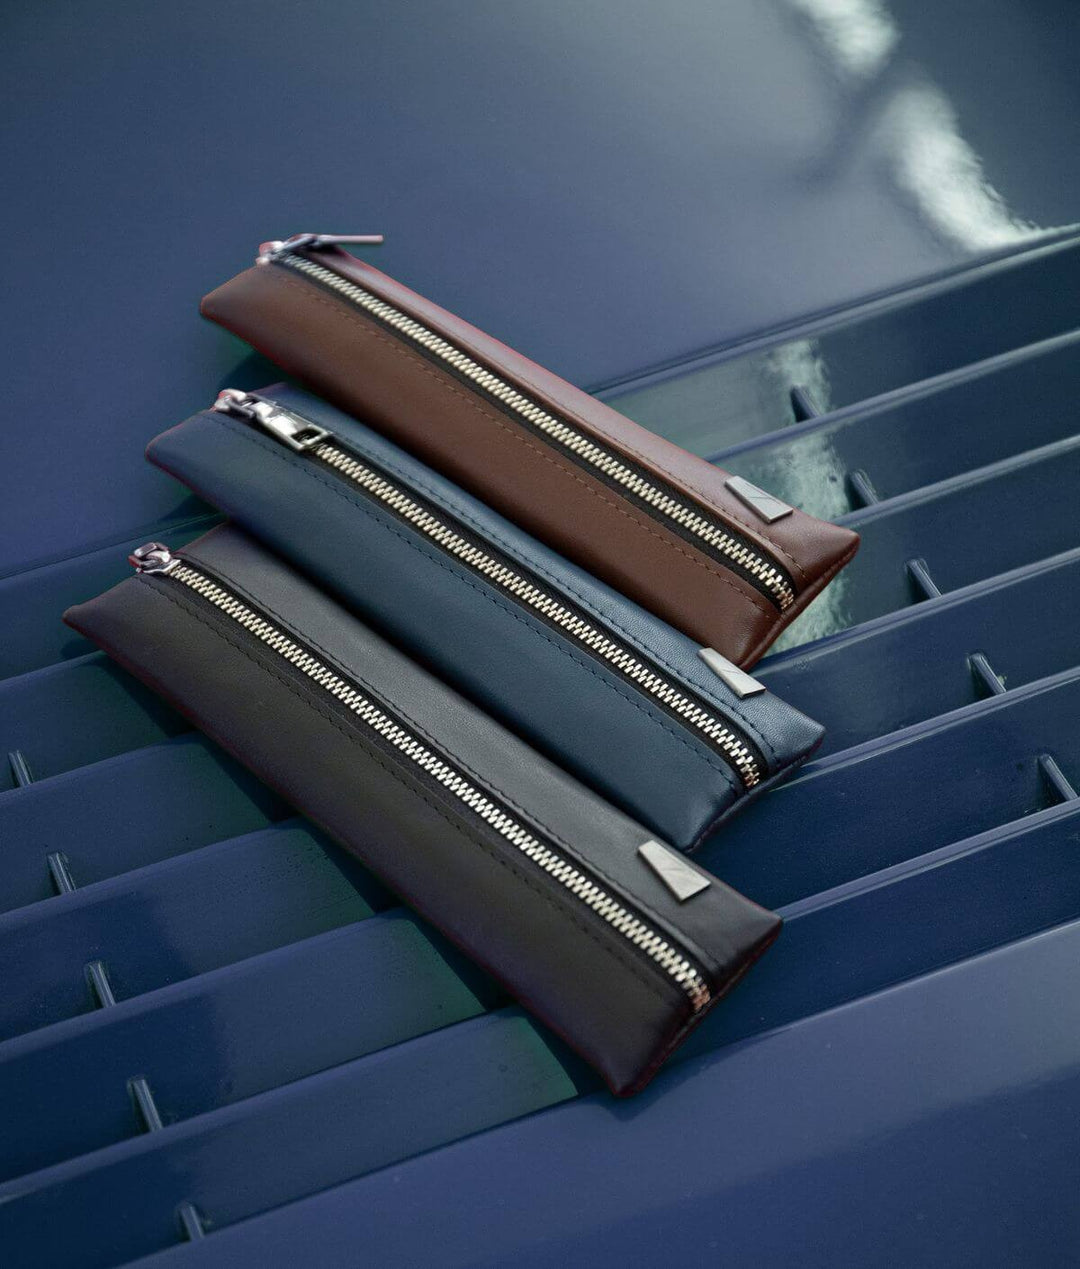 Leather zipper pouches in brown, blue, and black on a blue surface